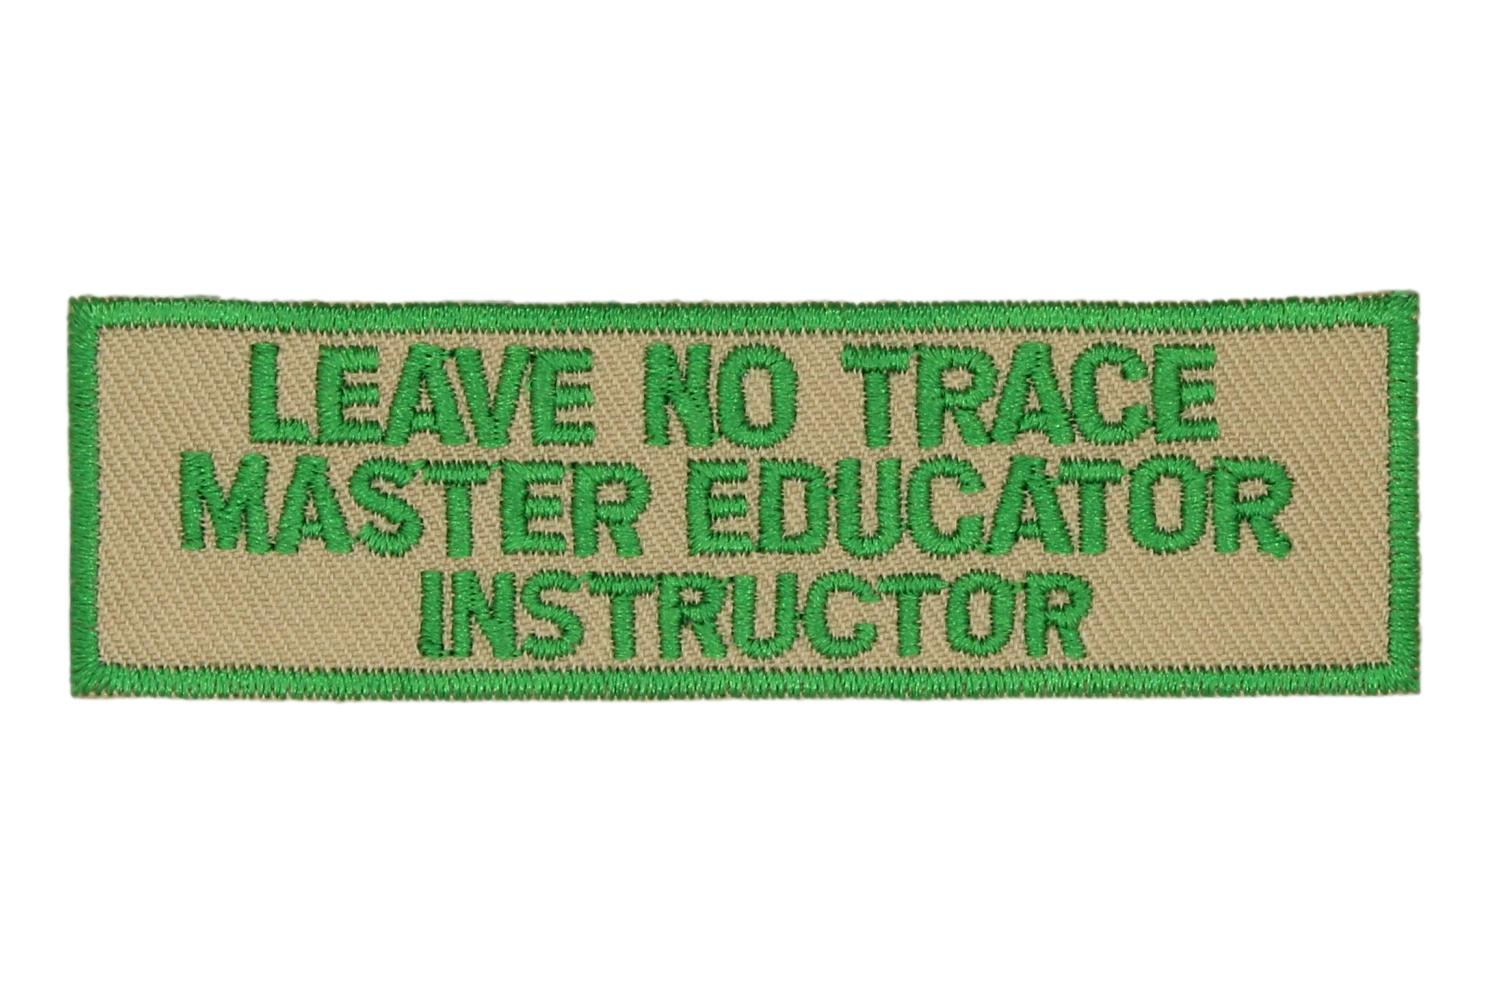 Leave No Trace Strip Master Educator Instructor Green